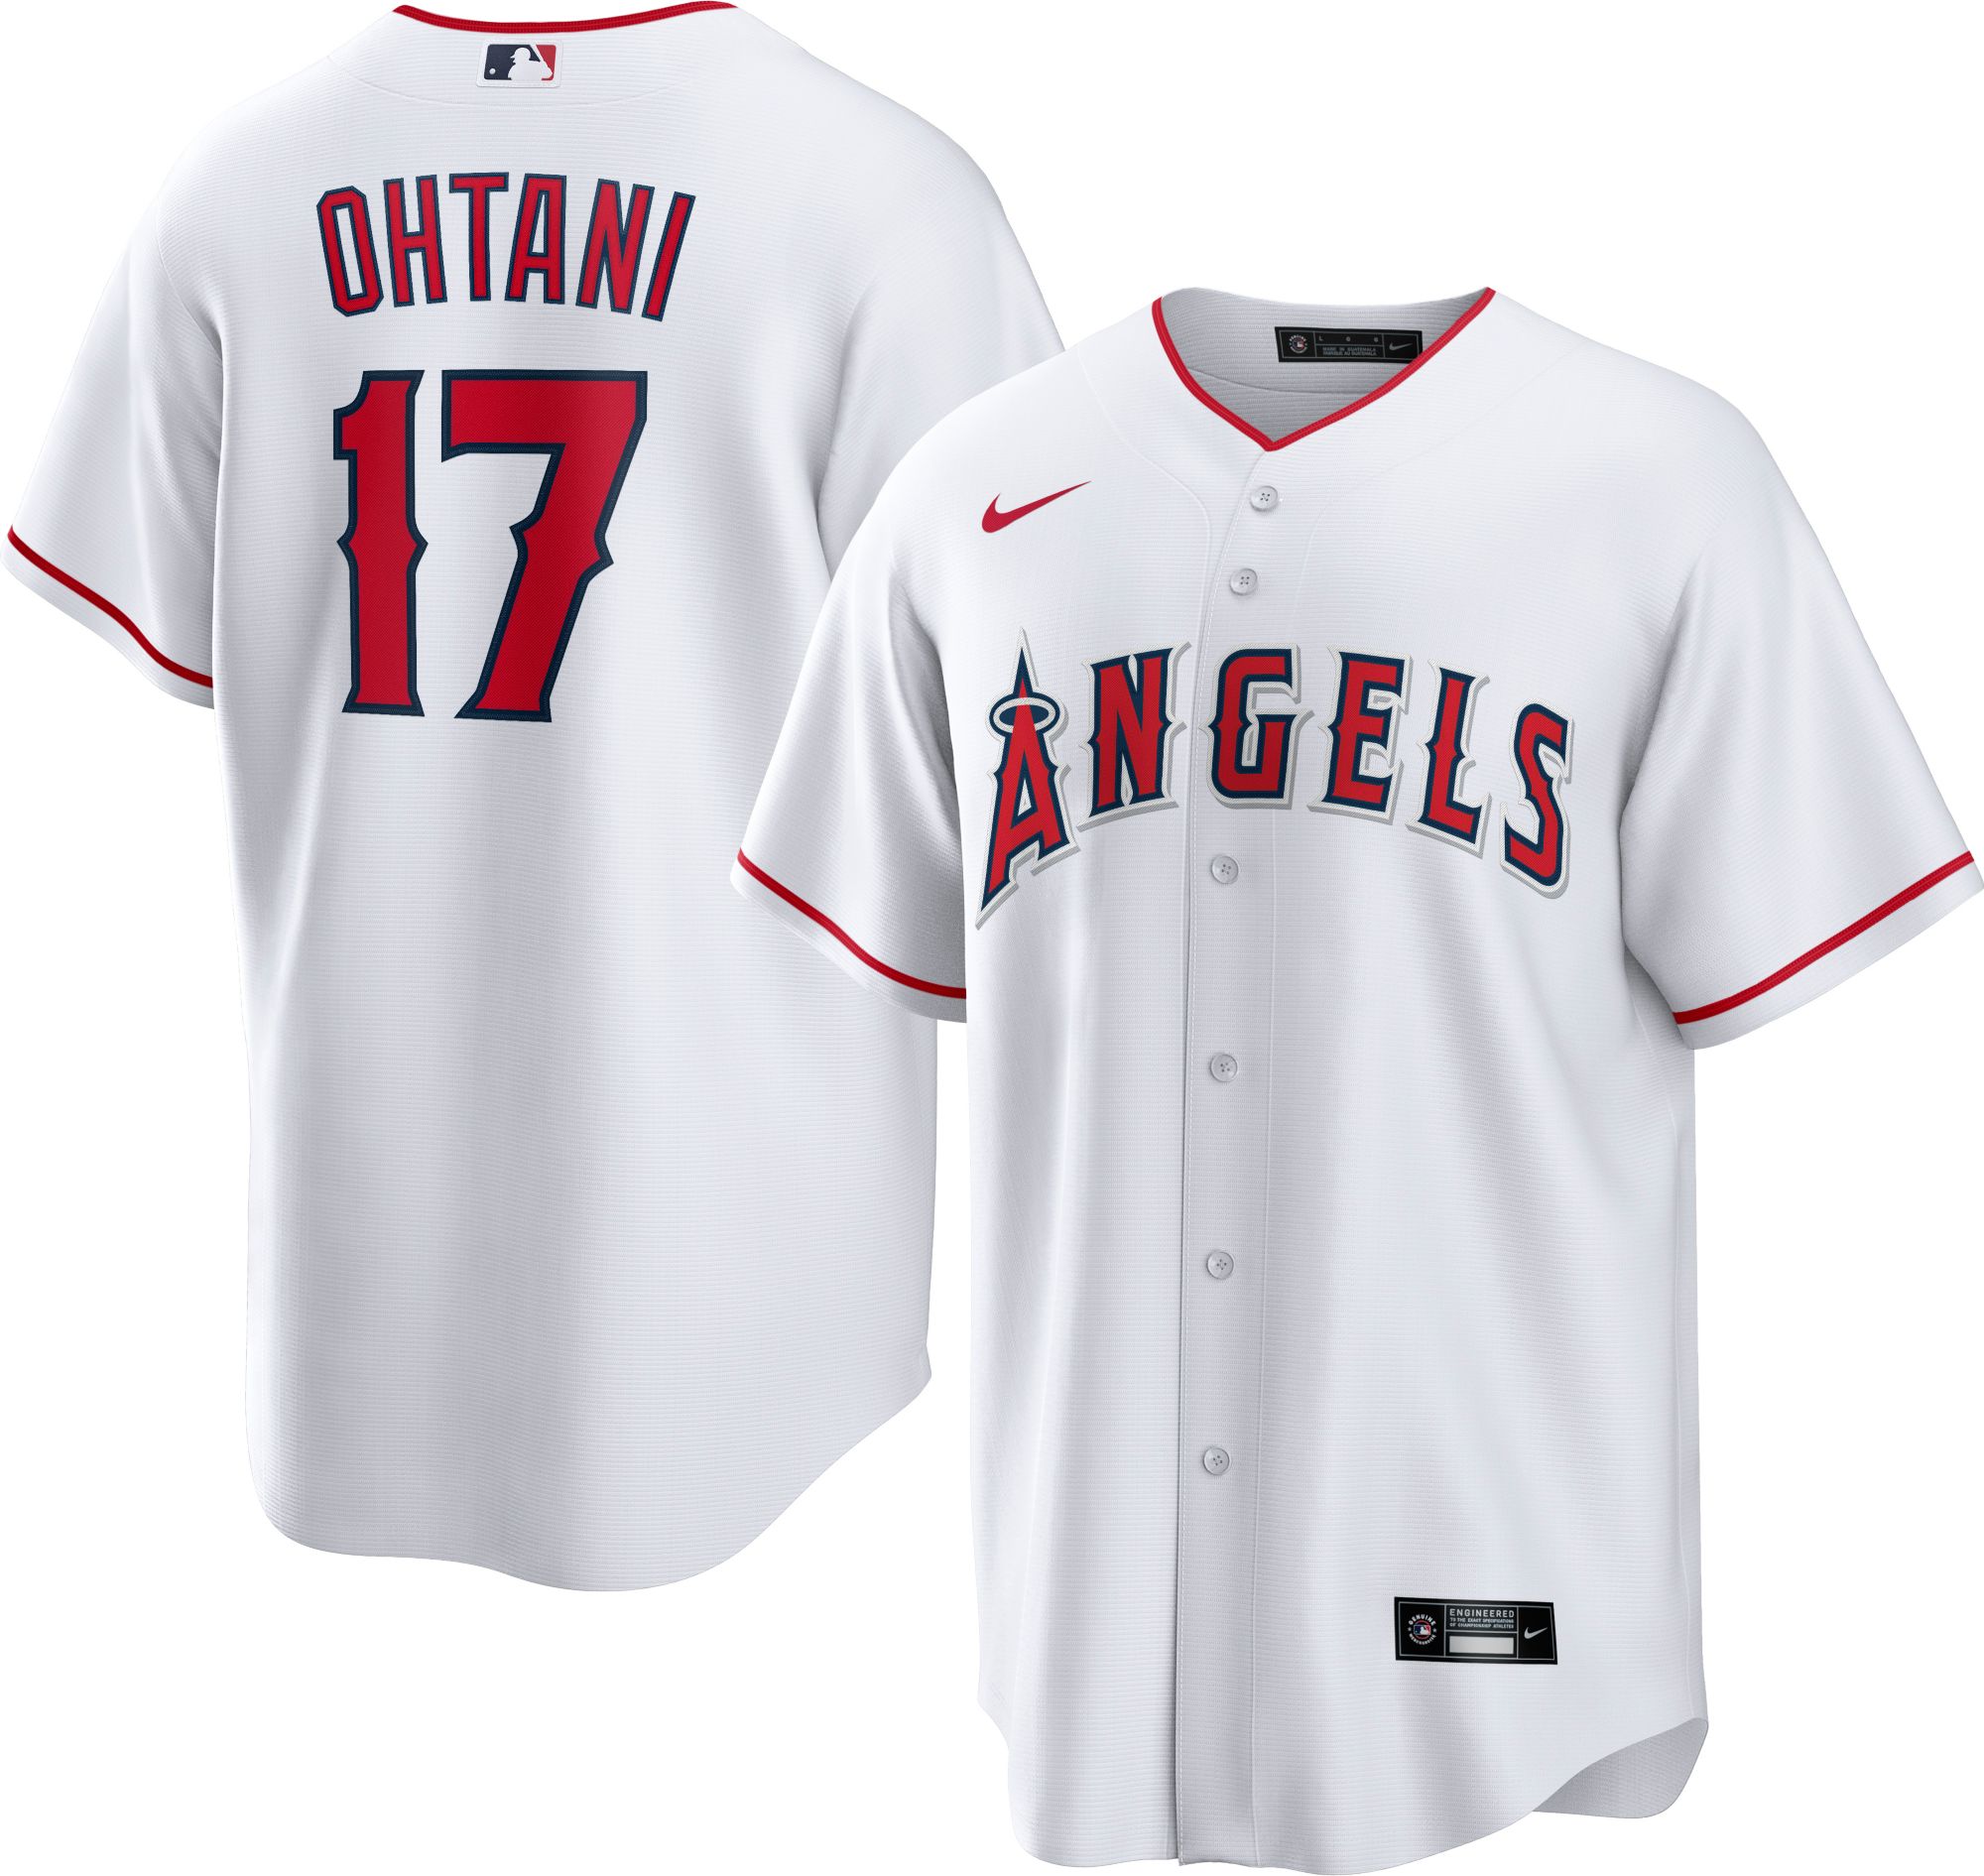 Angels #27 Mike Trout Basketball Style Jersey Gray Sleeveless Stadium  Giveaway